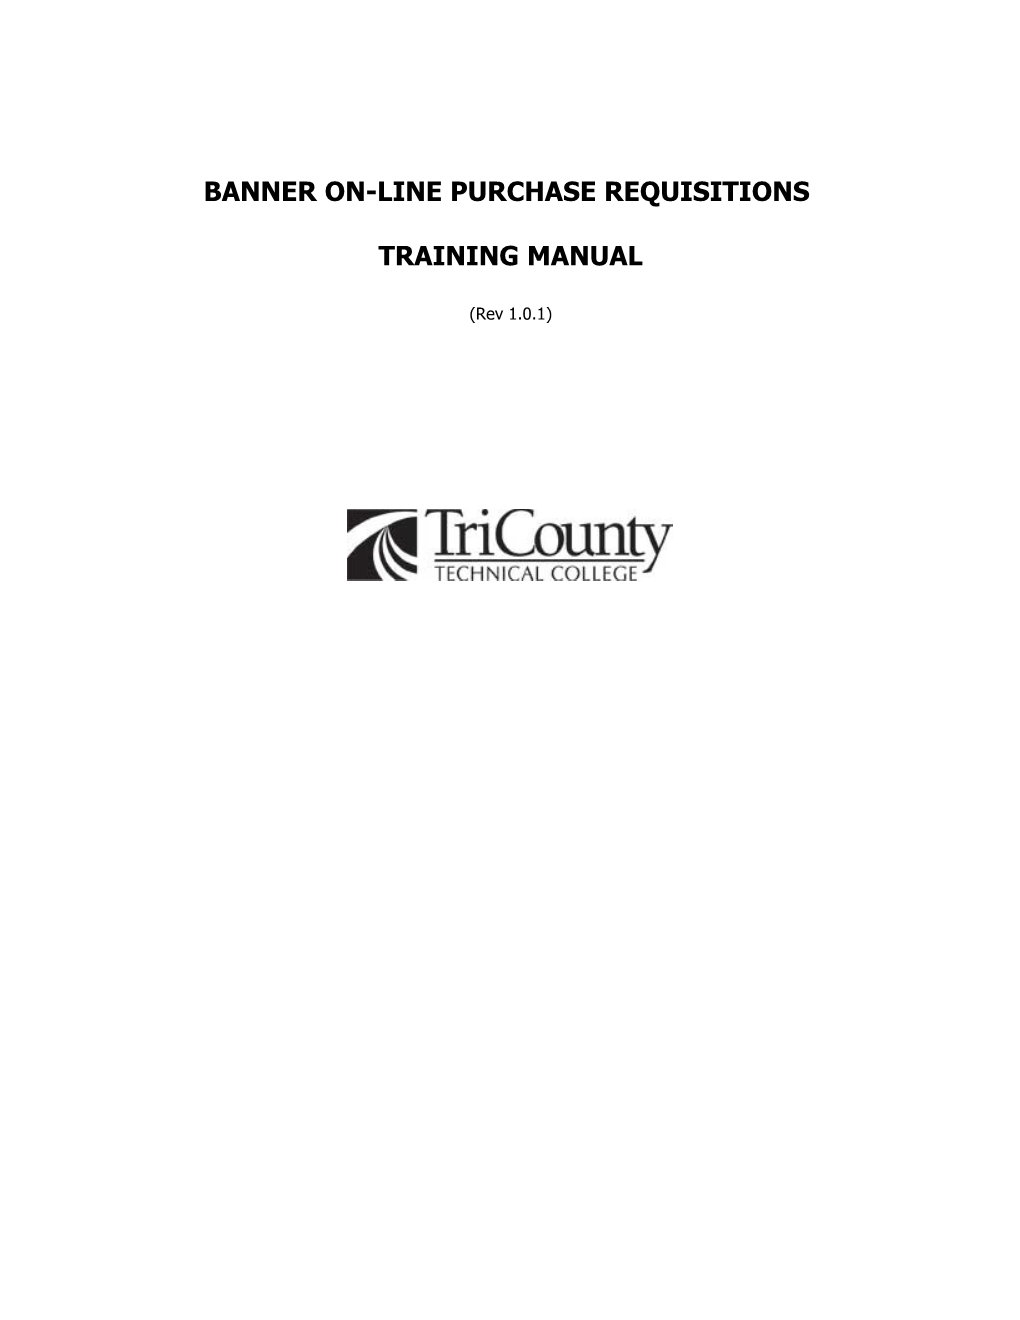 Banner On-Line Purchase Requisitions